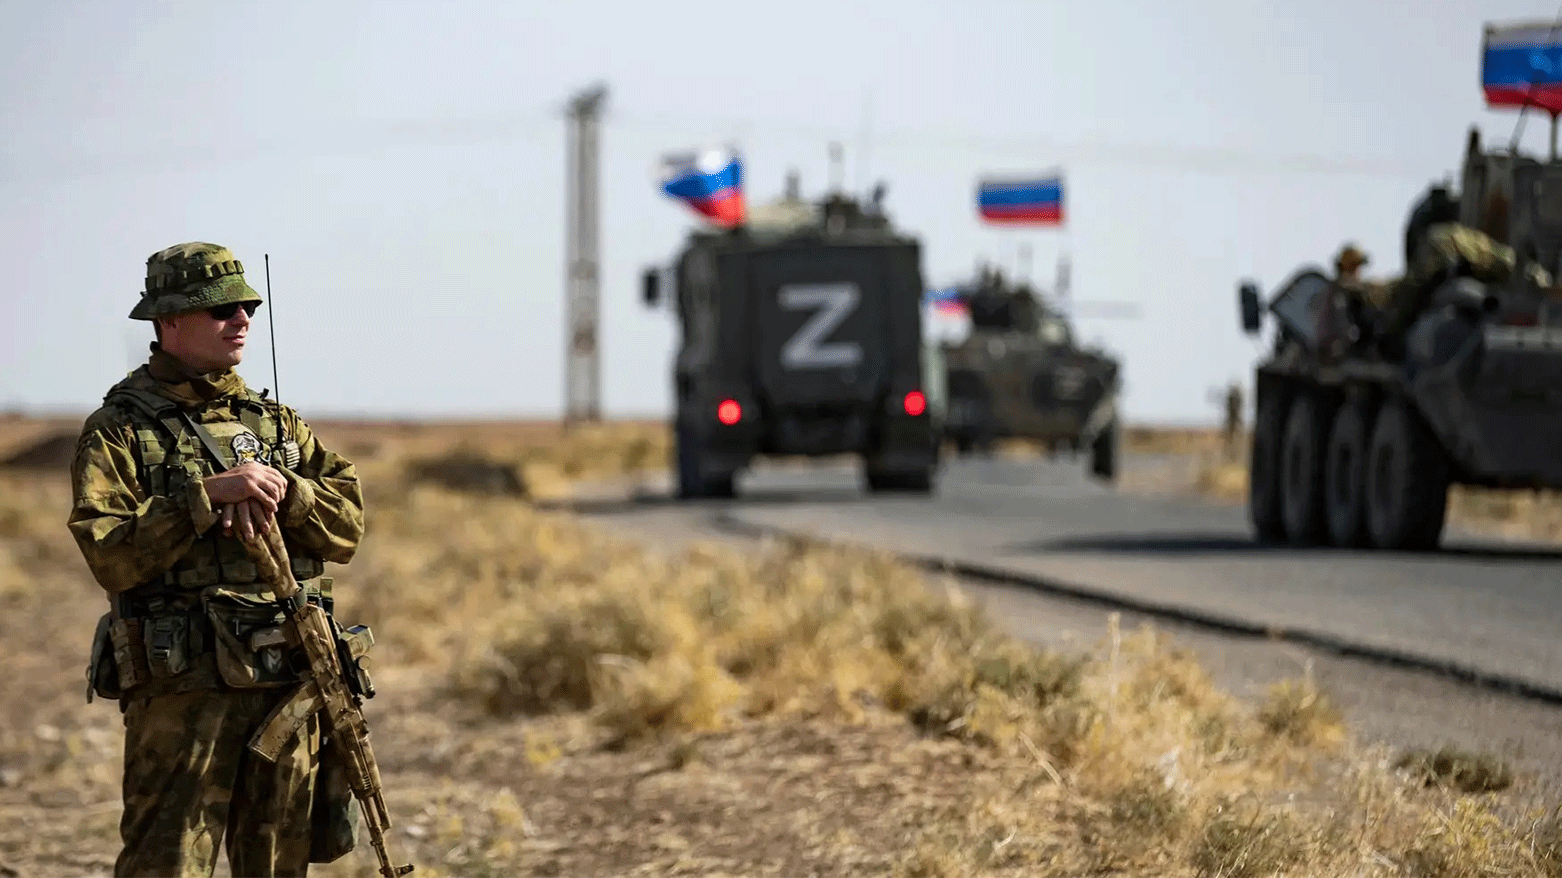 Soldiers of a Russian military convoy and their US counterparts exchange greetings as their patrol routes intersect in an oil field near Syria's al-Qahtaniyah on October 8, 2022 (Photo: Delil Souleiman/AFP)